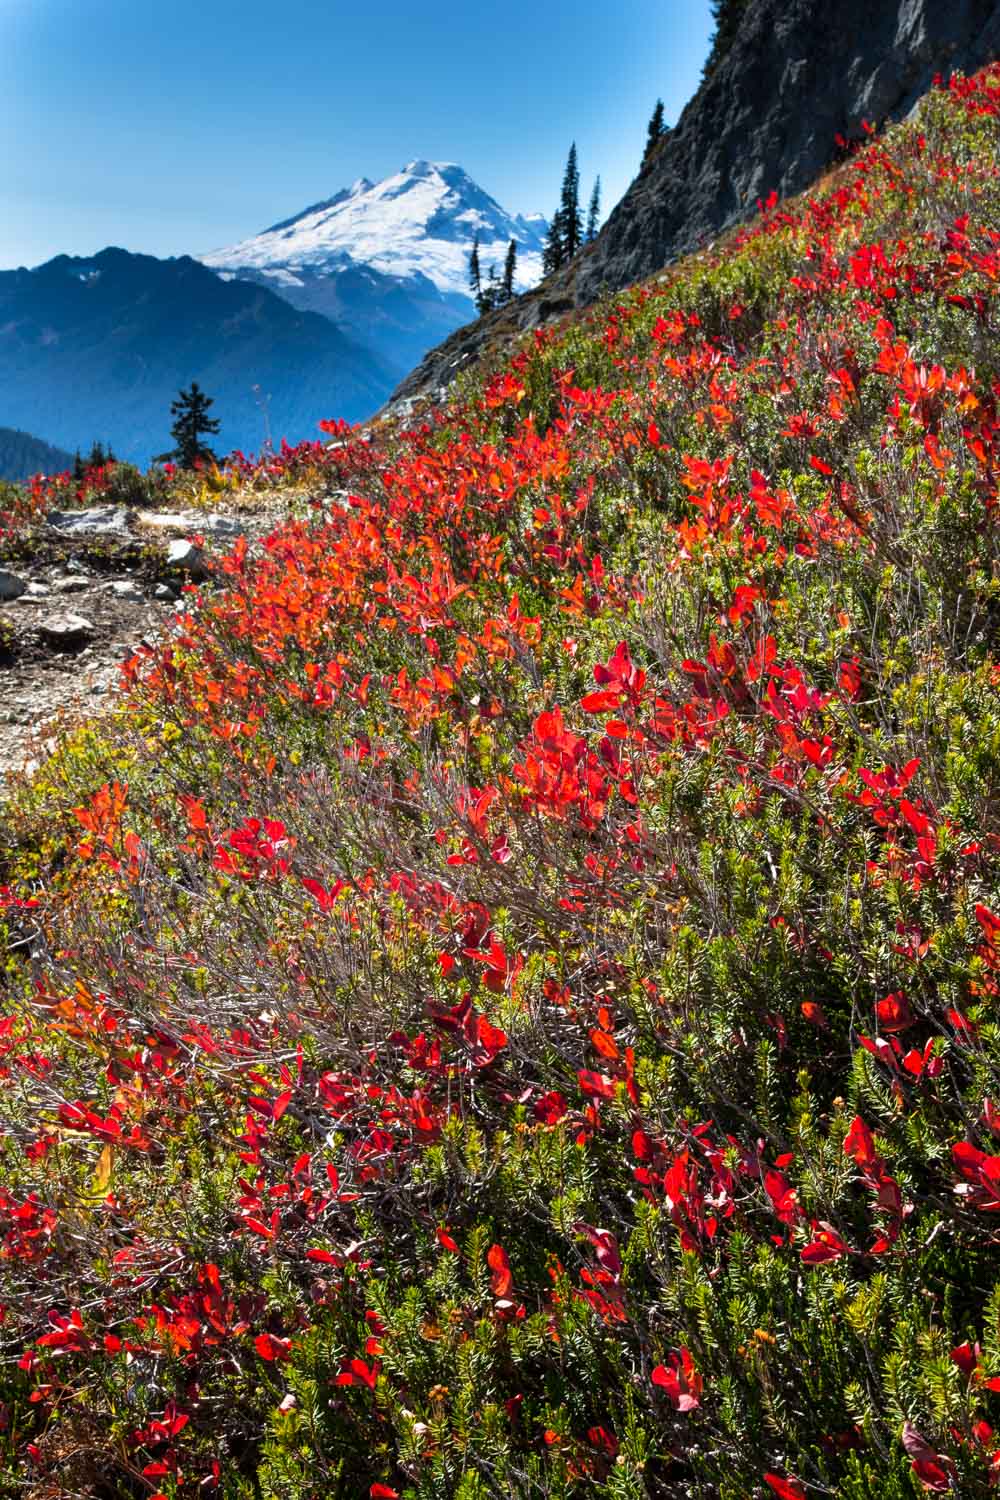 Hiking Mt. Baker and the North Cascades: Selected Walks Around Koma Kulshan (Mt. Baker) & the North Cascades